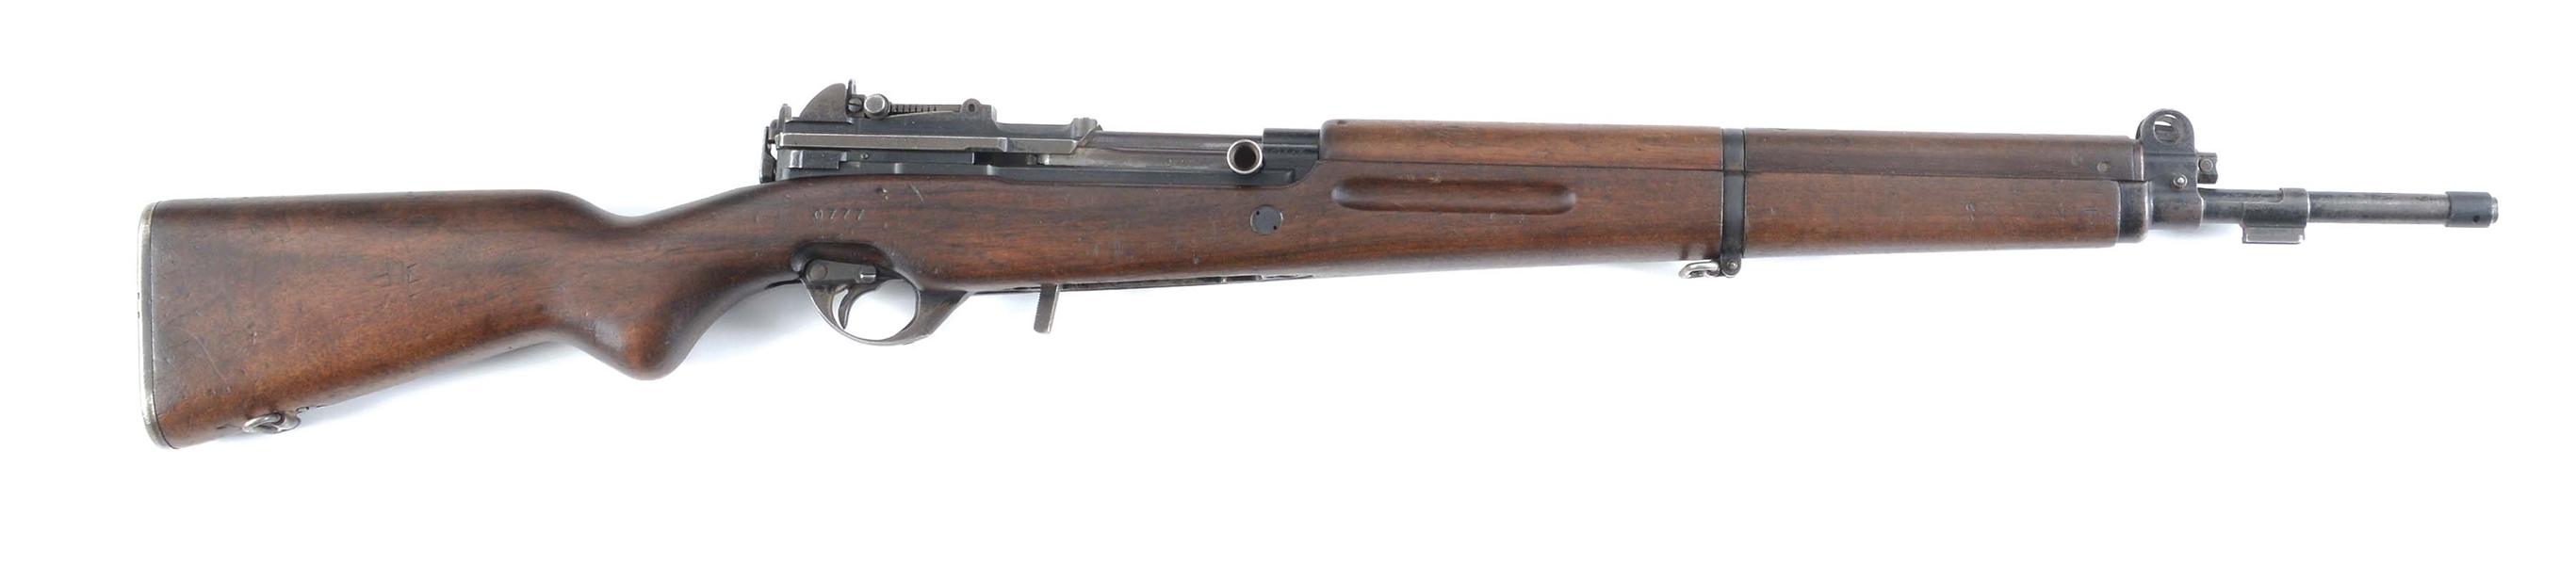 (C) FABRIQUE NATIONALE ARGENTINE NAVY FN-49 SEMI AUTOMATIC MILITARY RIFLE.